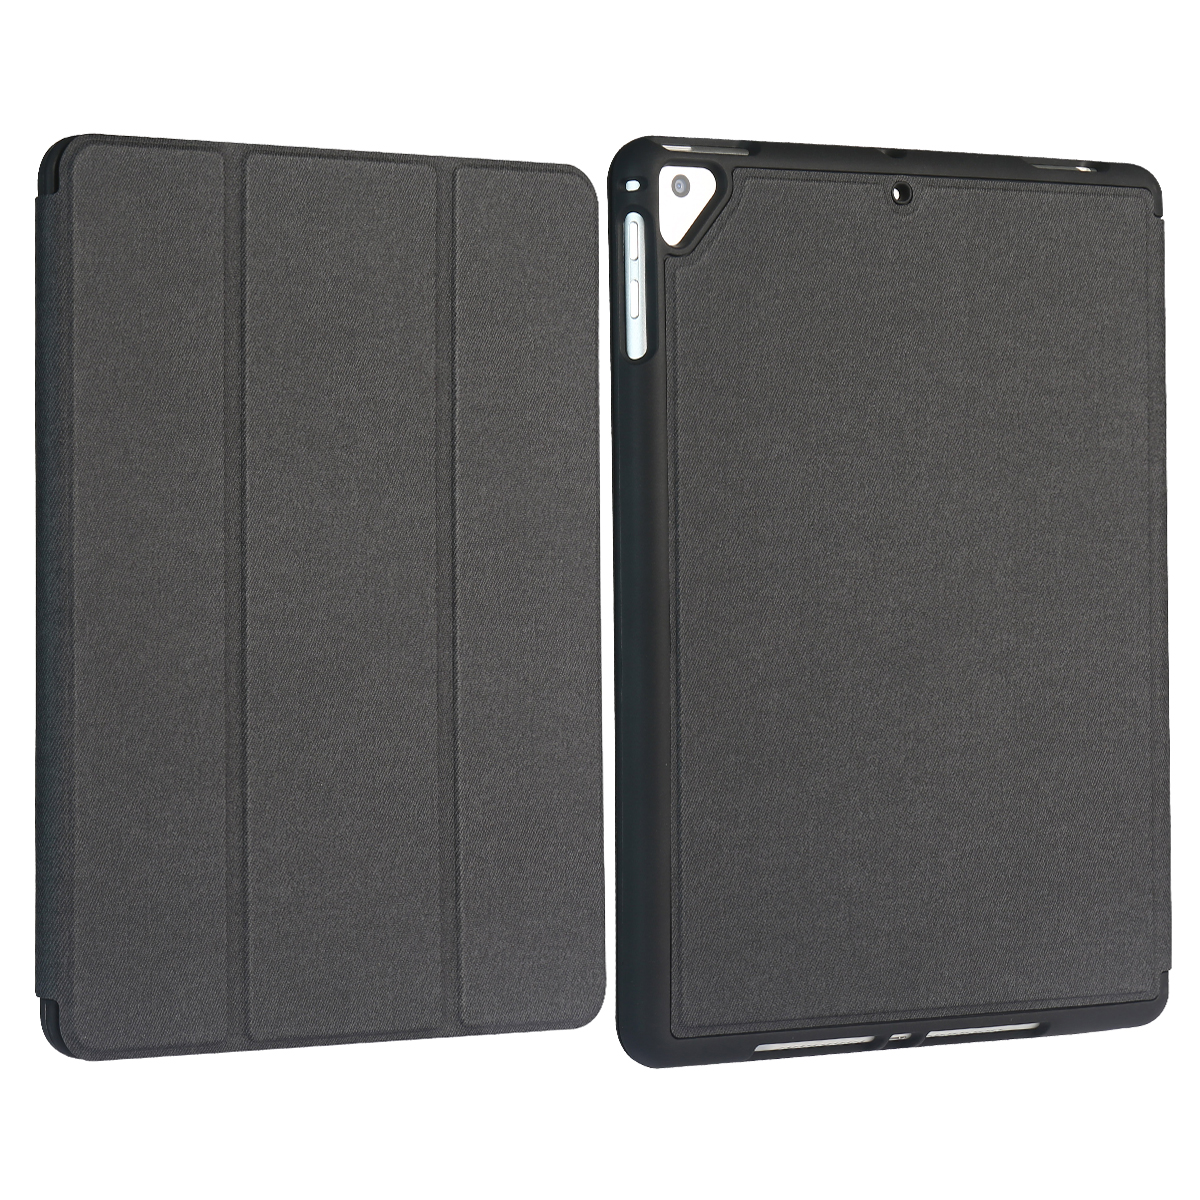 Trifold Stand, Soft TPU Back Cover, Lightweight Shockproof Case for iPad 2022